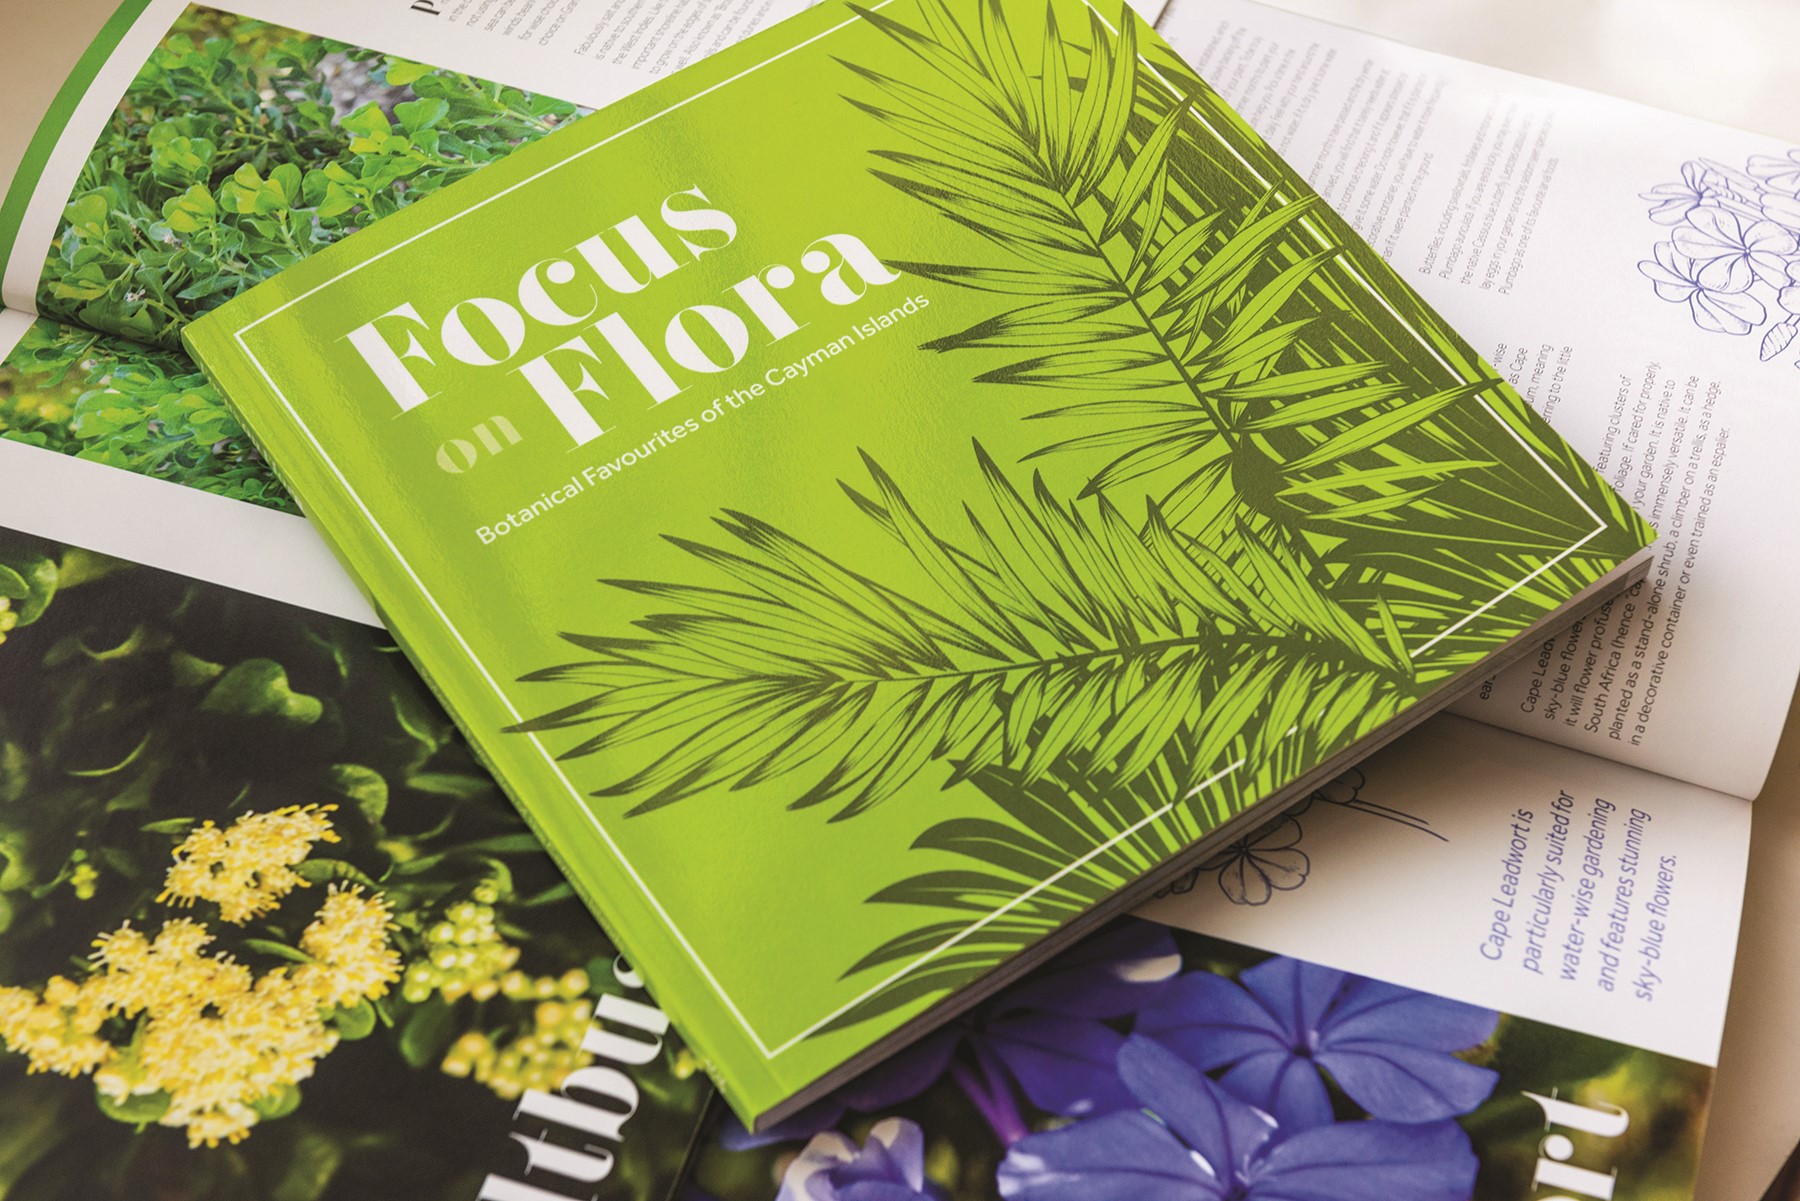 The making of Focus on Flora, the book